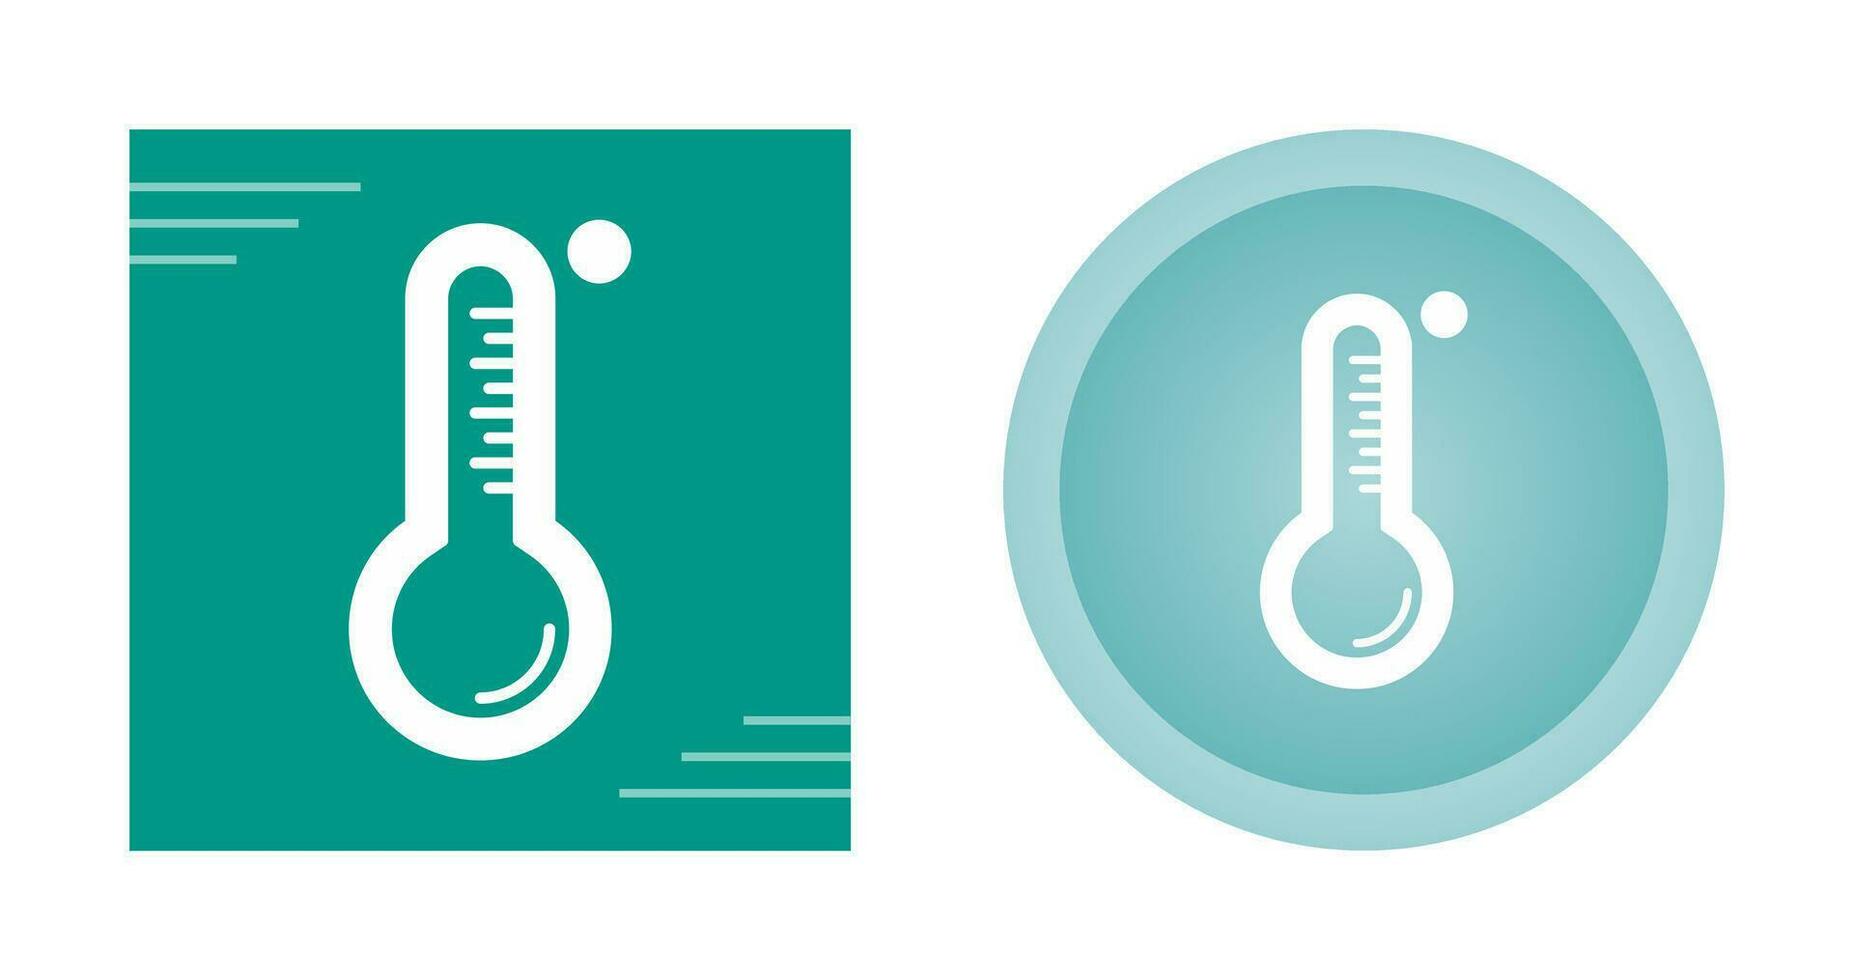 thermometer vector pictogram